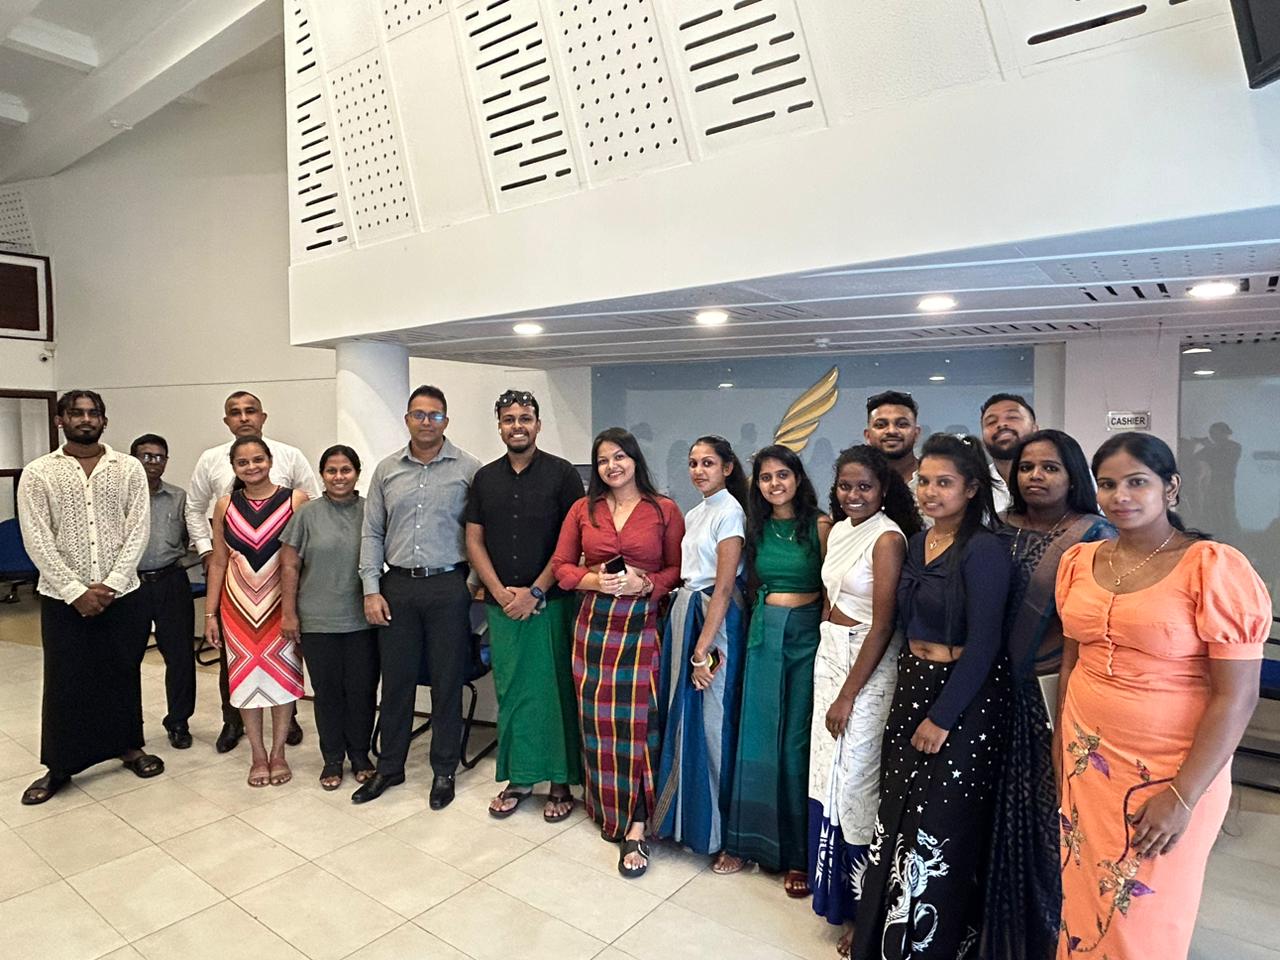 Travel Mo Spreads Joy at Mack Air Office Ahead of Sinhala and Tamil New Year